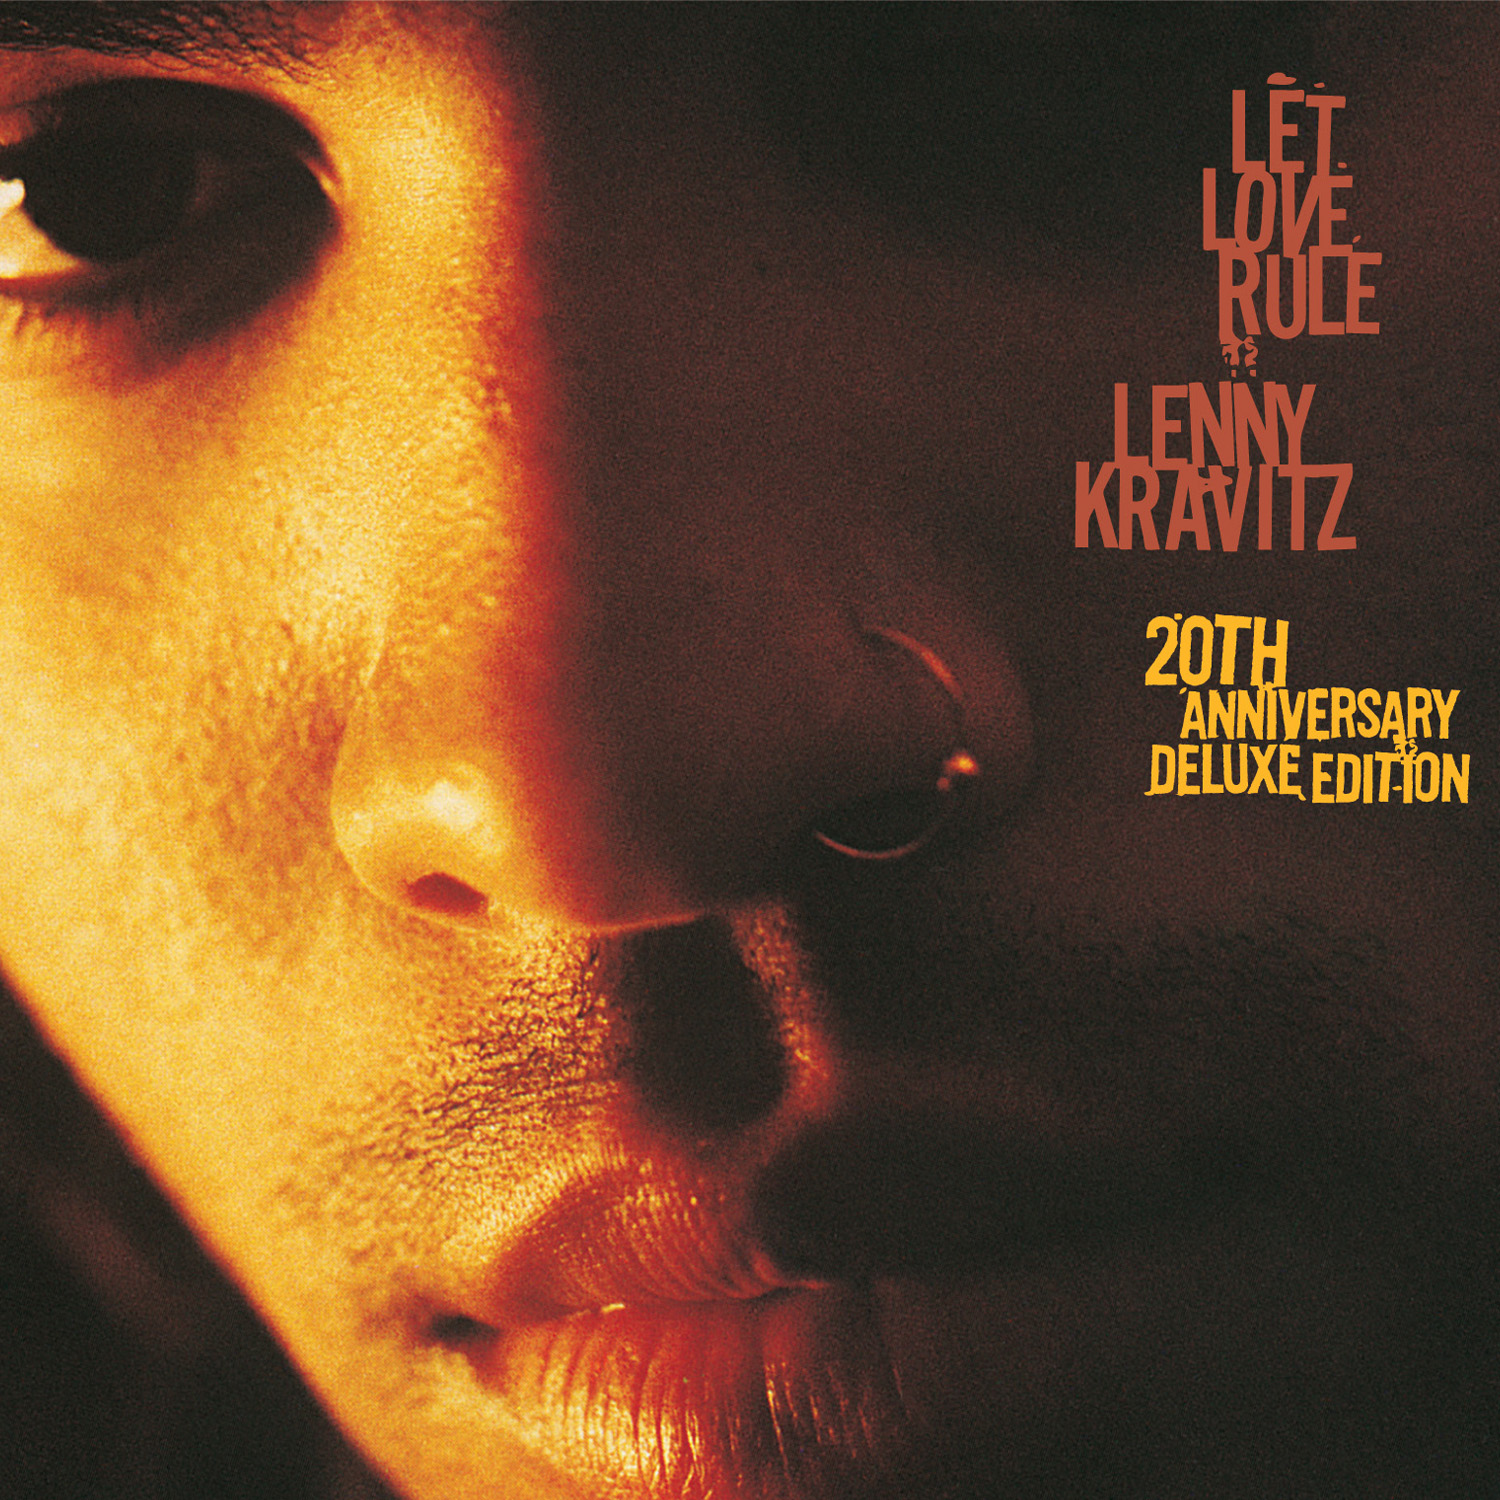 Lenny Kravitz let Love Rule20th Anniversary Edition Cover. Cover: Provided By M. Bitton